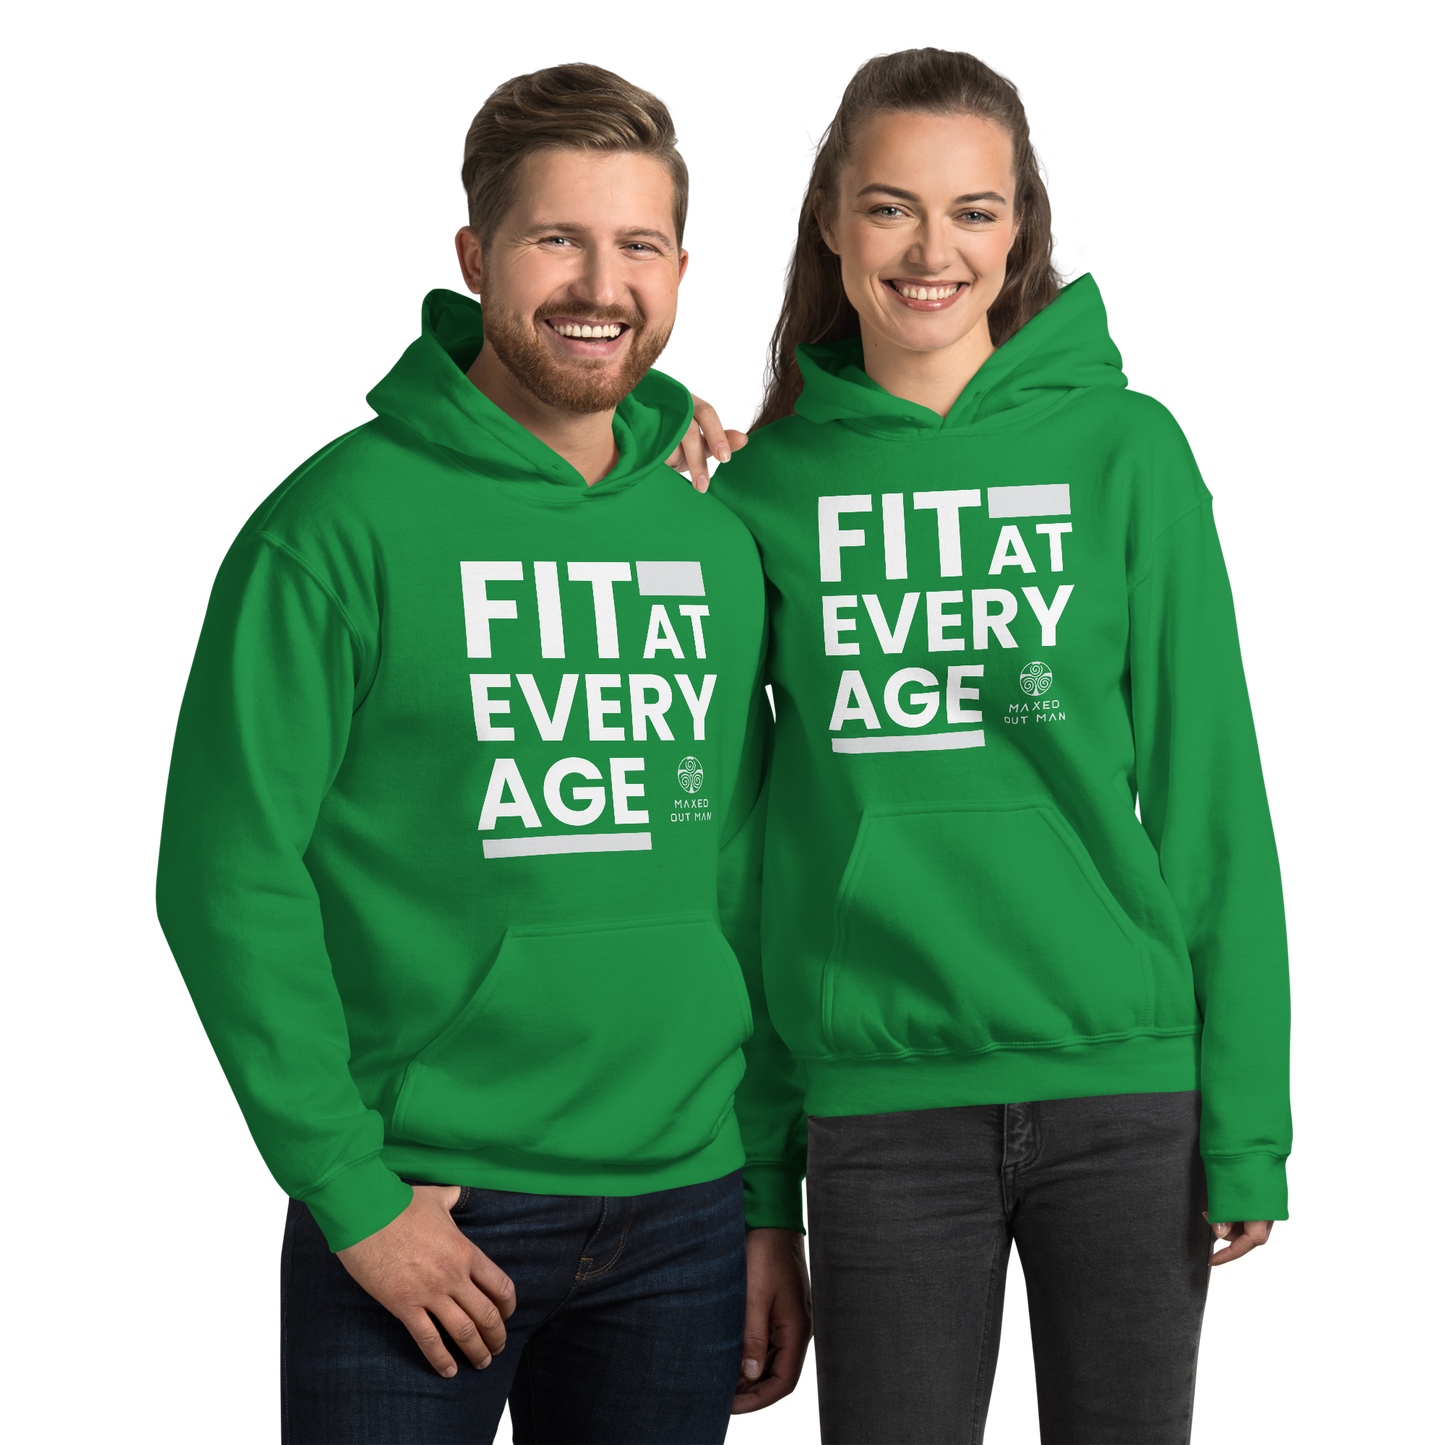 Fit at Every Age Unisex Hoodie - Darker Colors